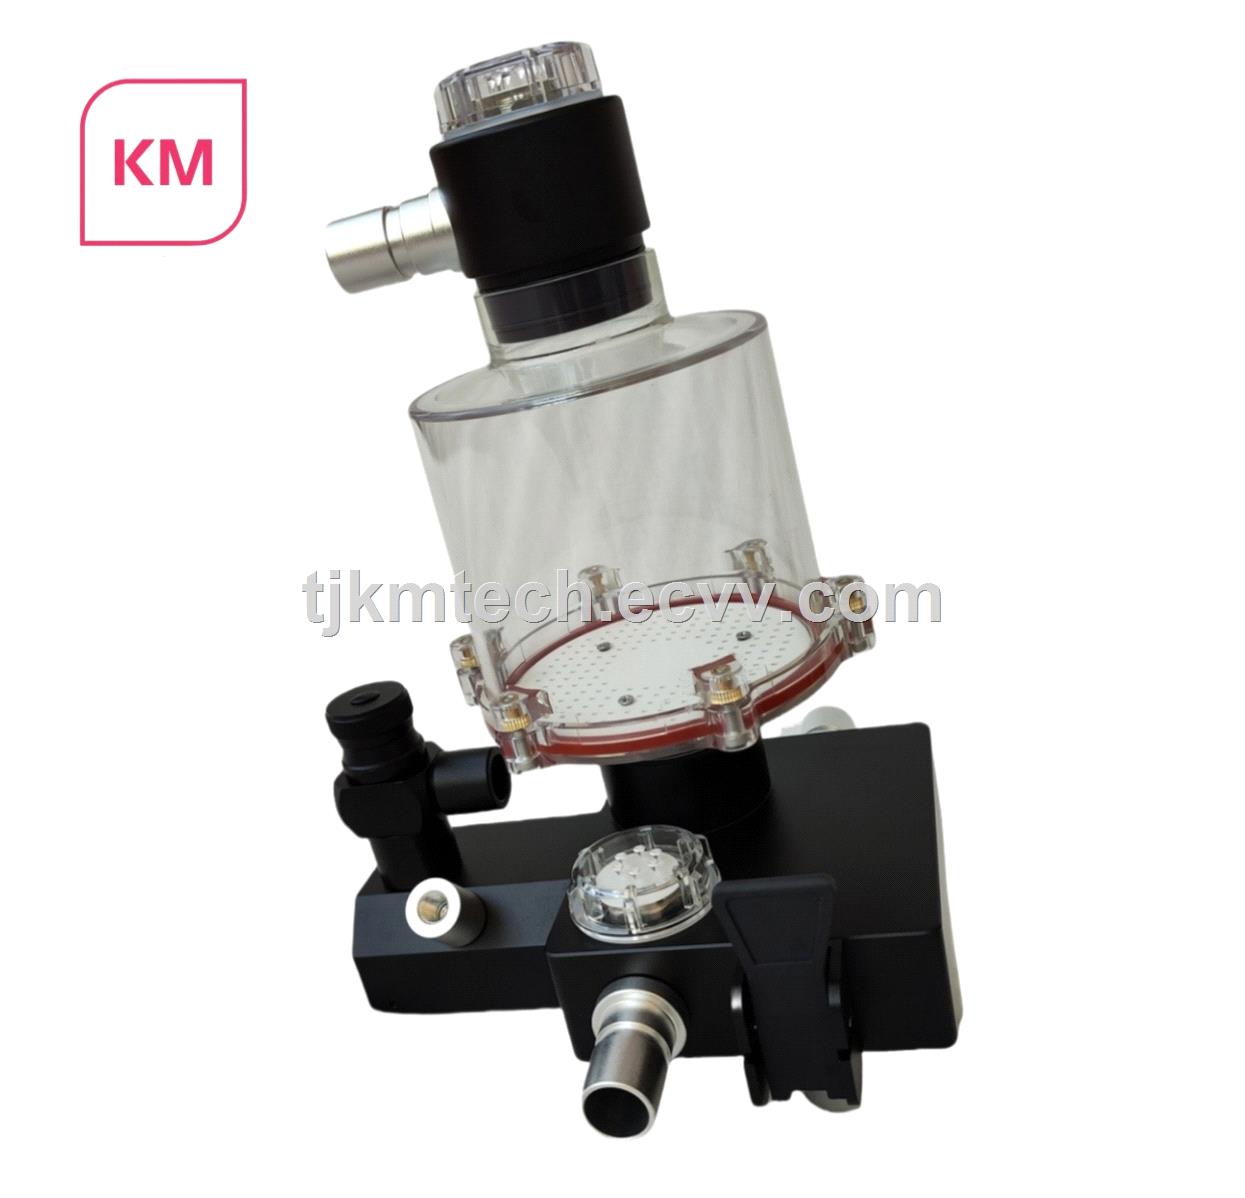 Parts for Anesthesia Machine Circle Absorber with Pressure Gauge and APL Valve and Canister